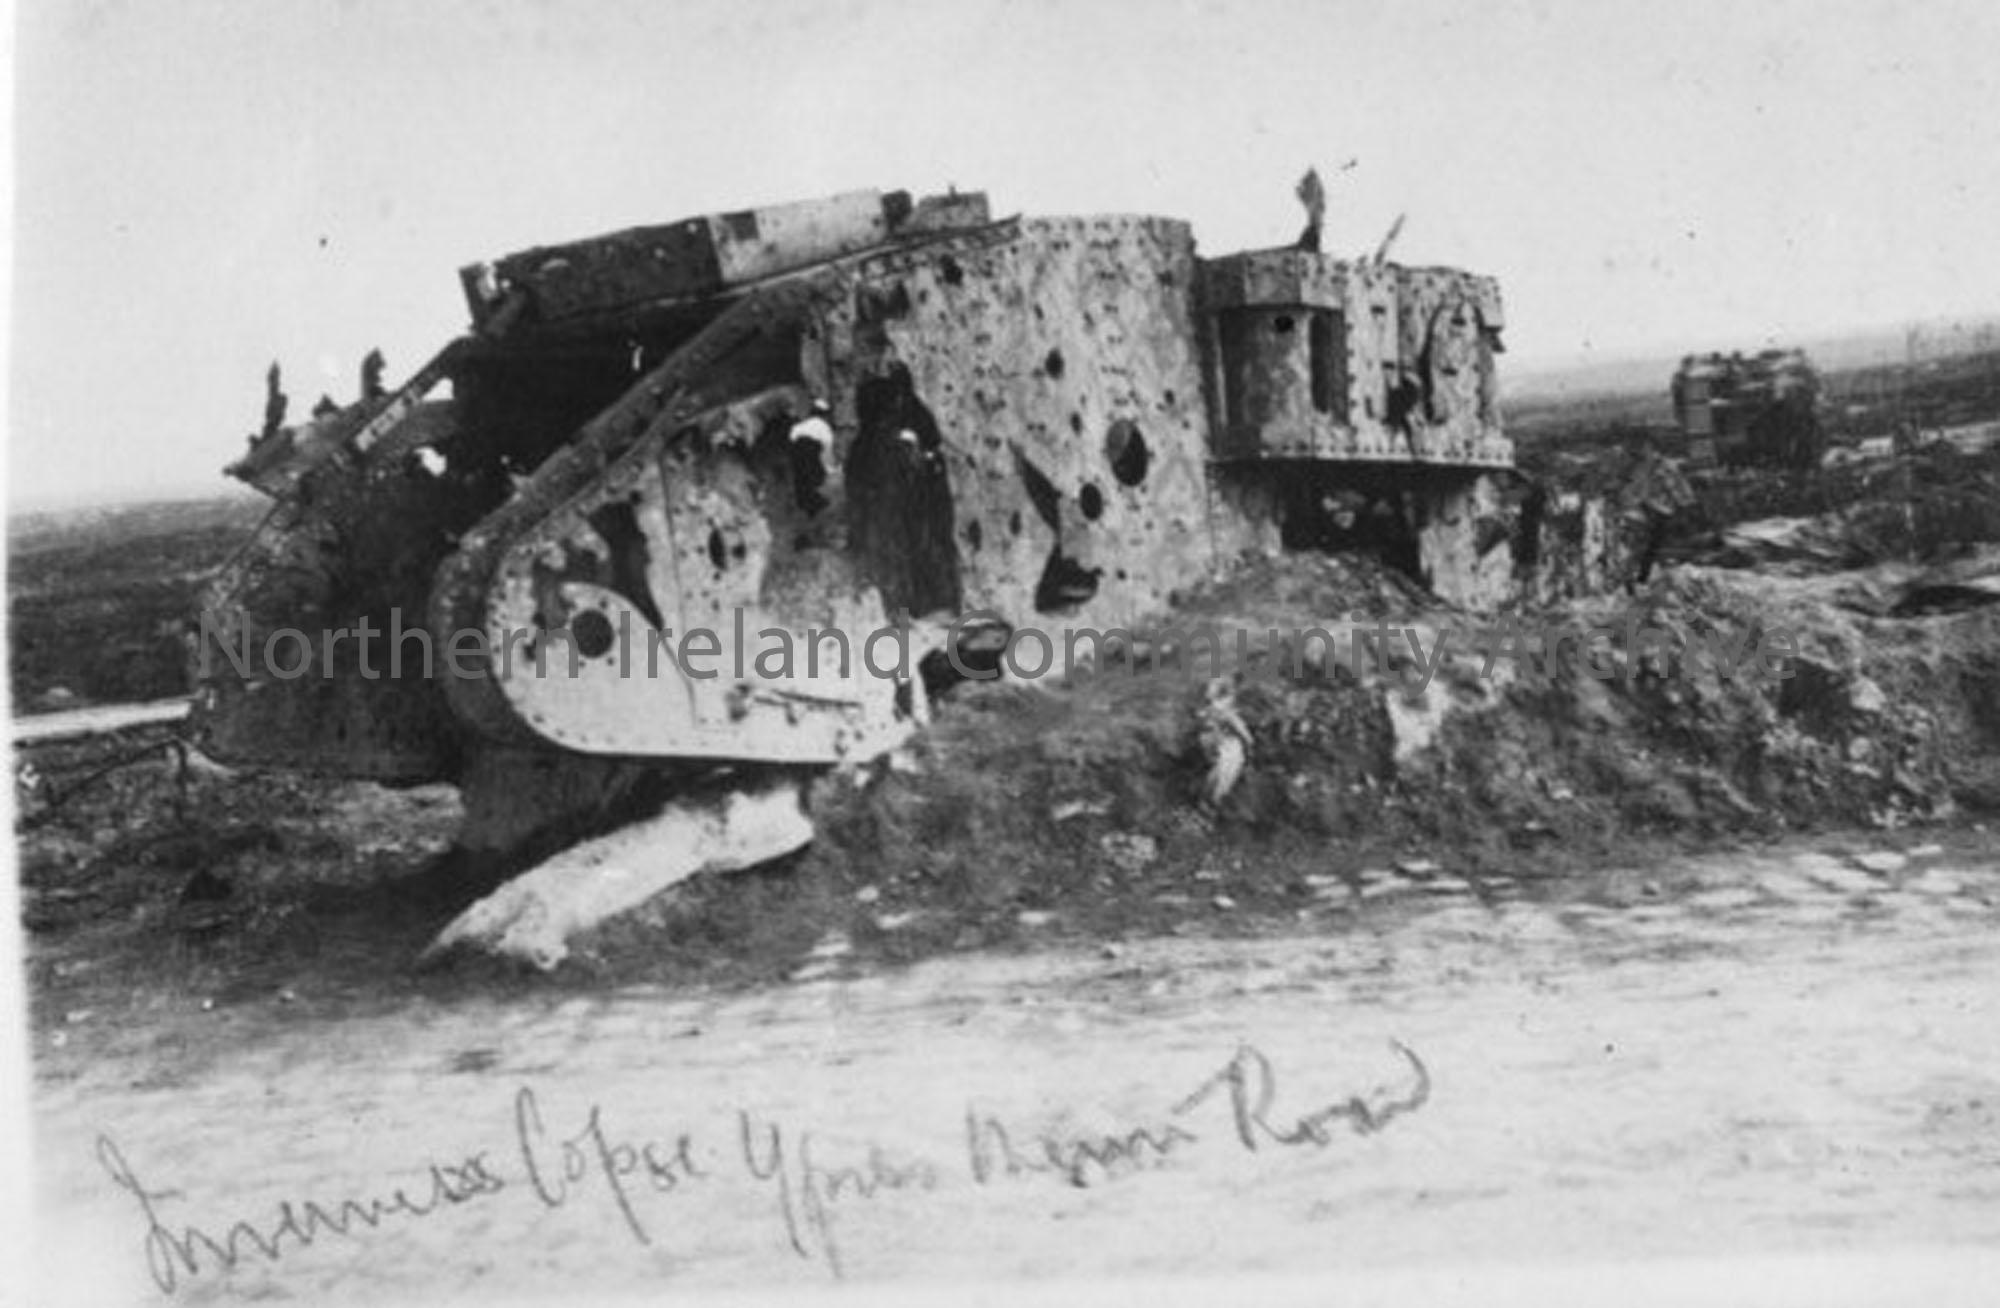 The remains of a British tank at Inverness Copse on the Ypres to Menin Road. These photographs are reproduced from the album of Major John C. Robb, Ro…